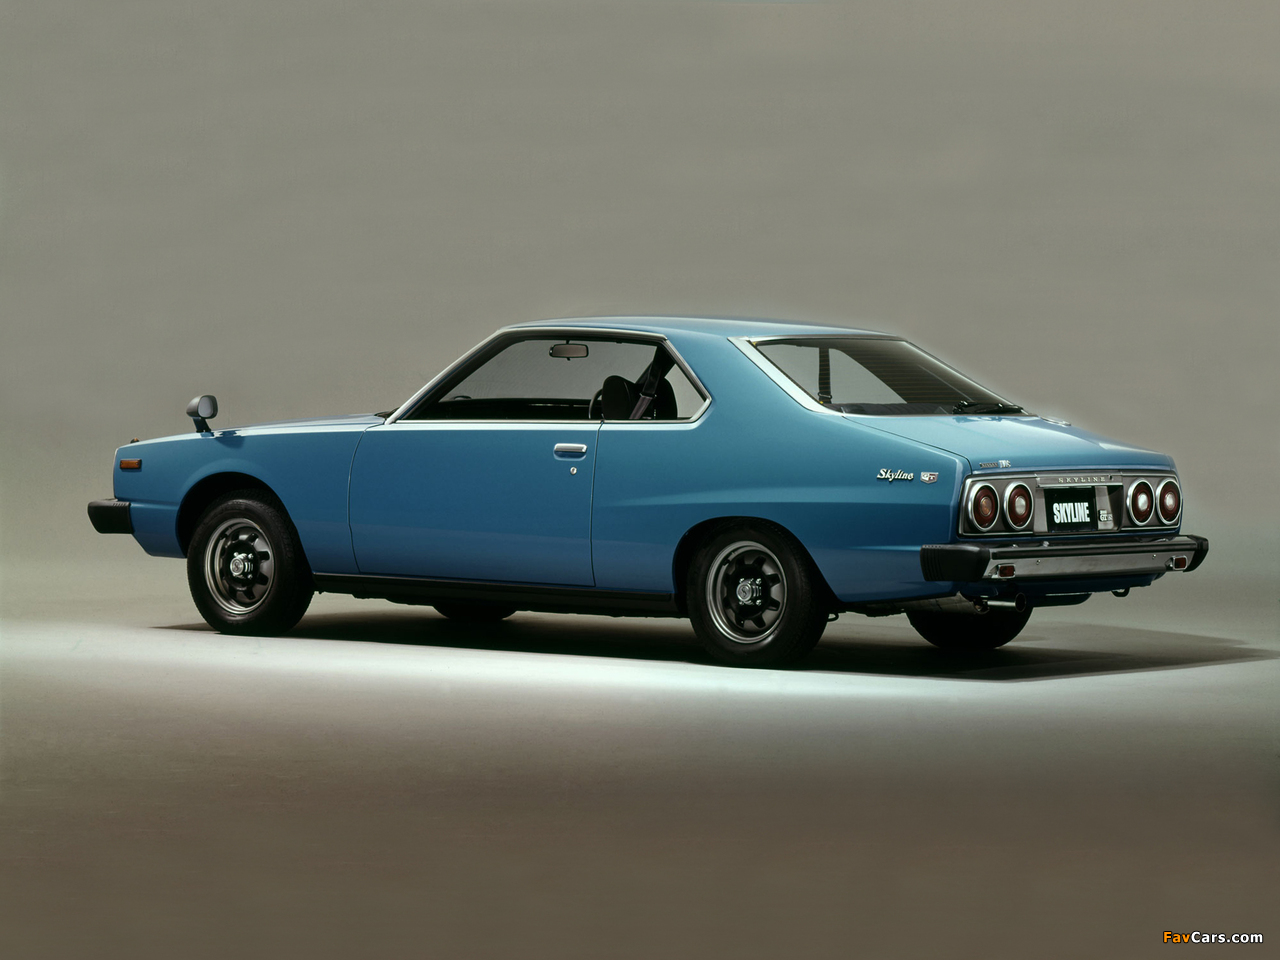 Nissan Skyline 2000GT Coupe (C210) 1977–79 pictures (1280 x 960)